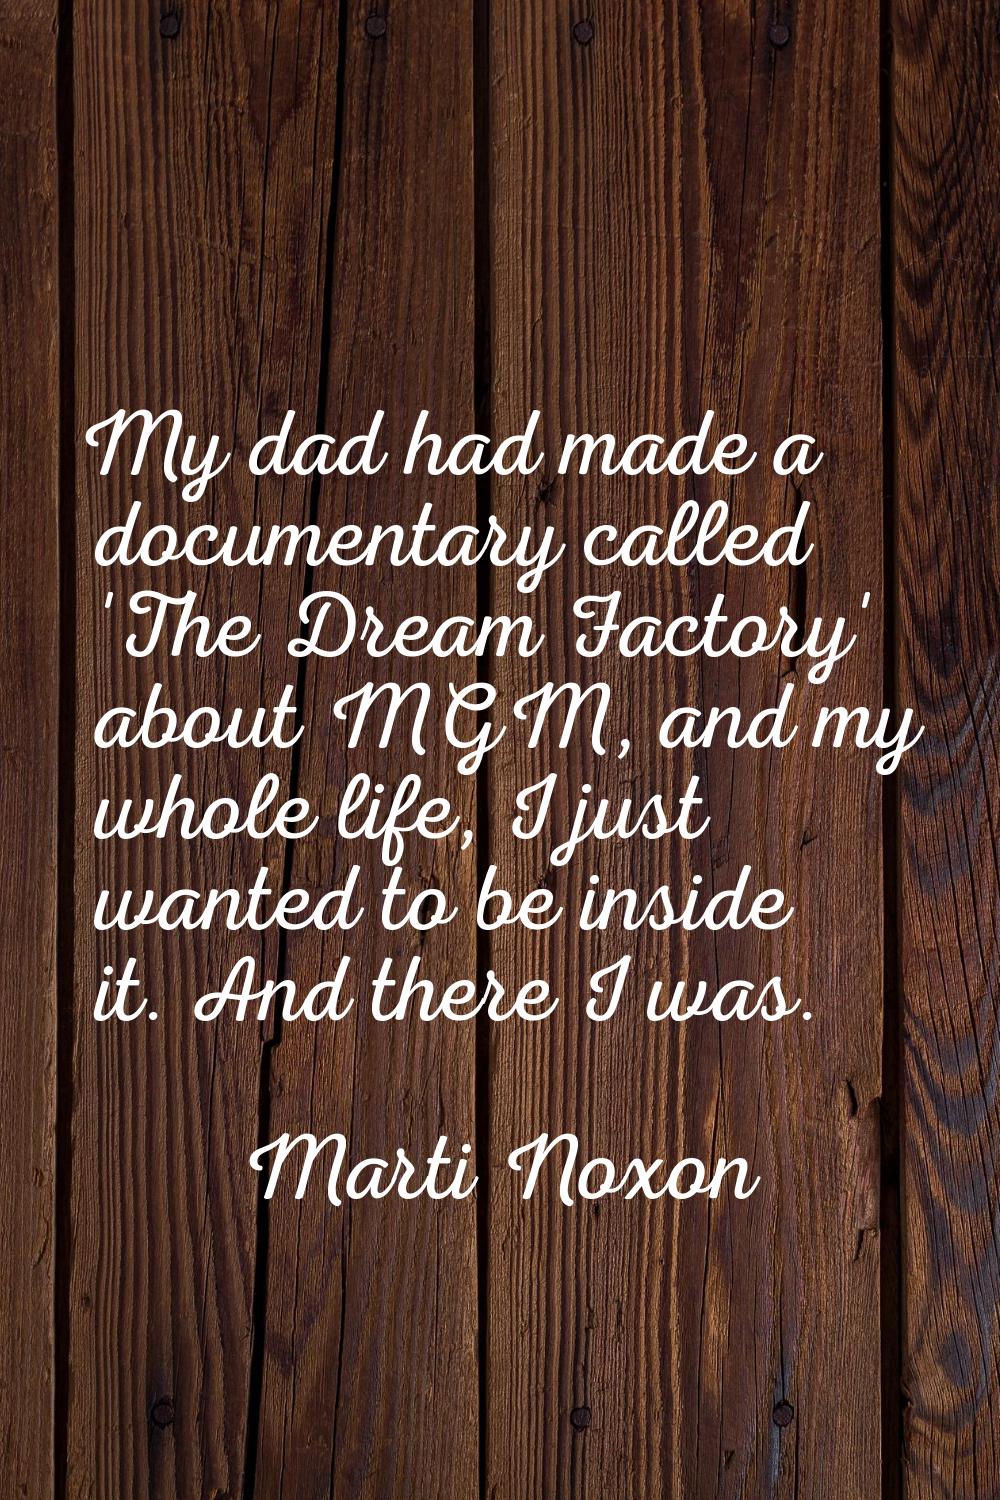 My dad had made a documentary called 'The Dream Factory' about MGM, and my whole life, I just wante